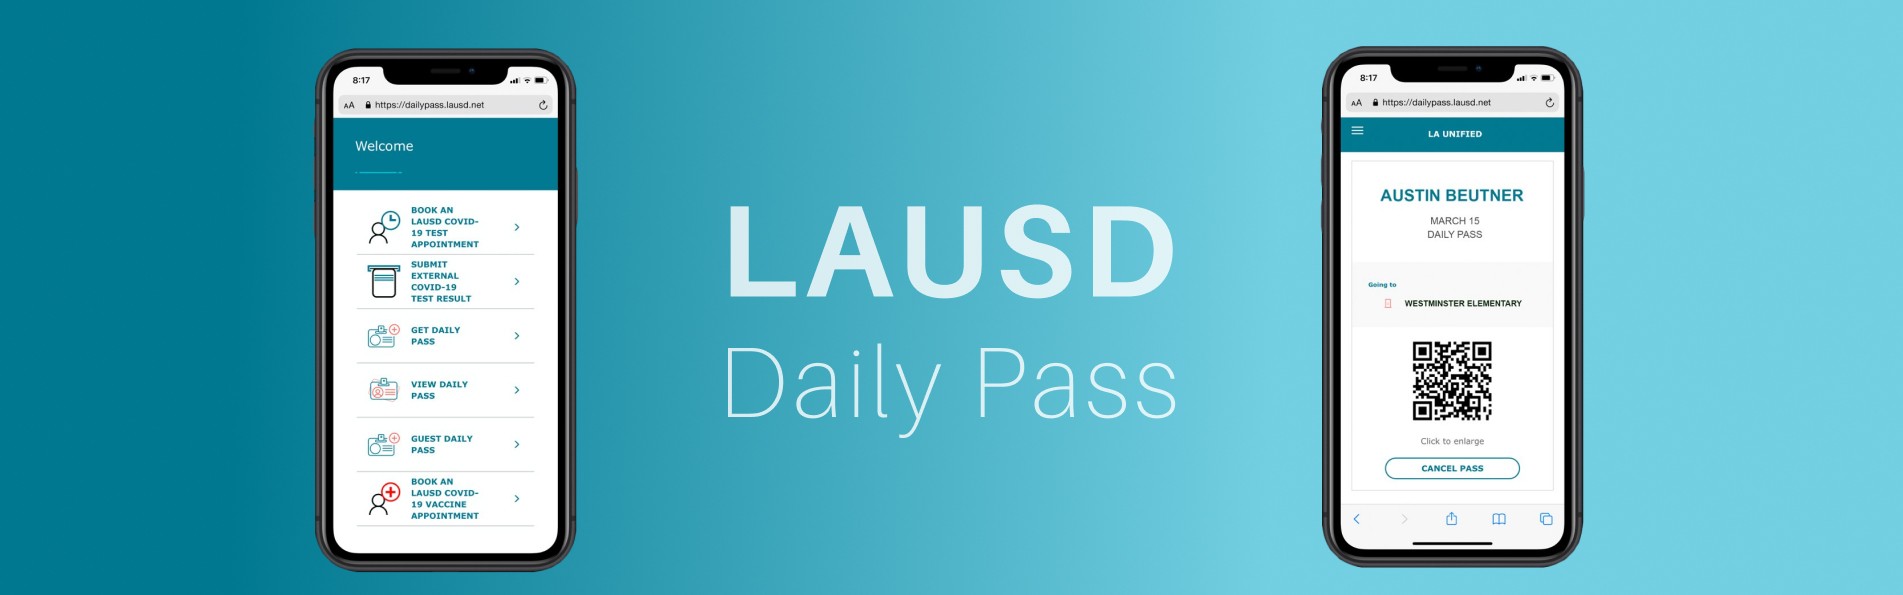 LAUSD Daily Pass